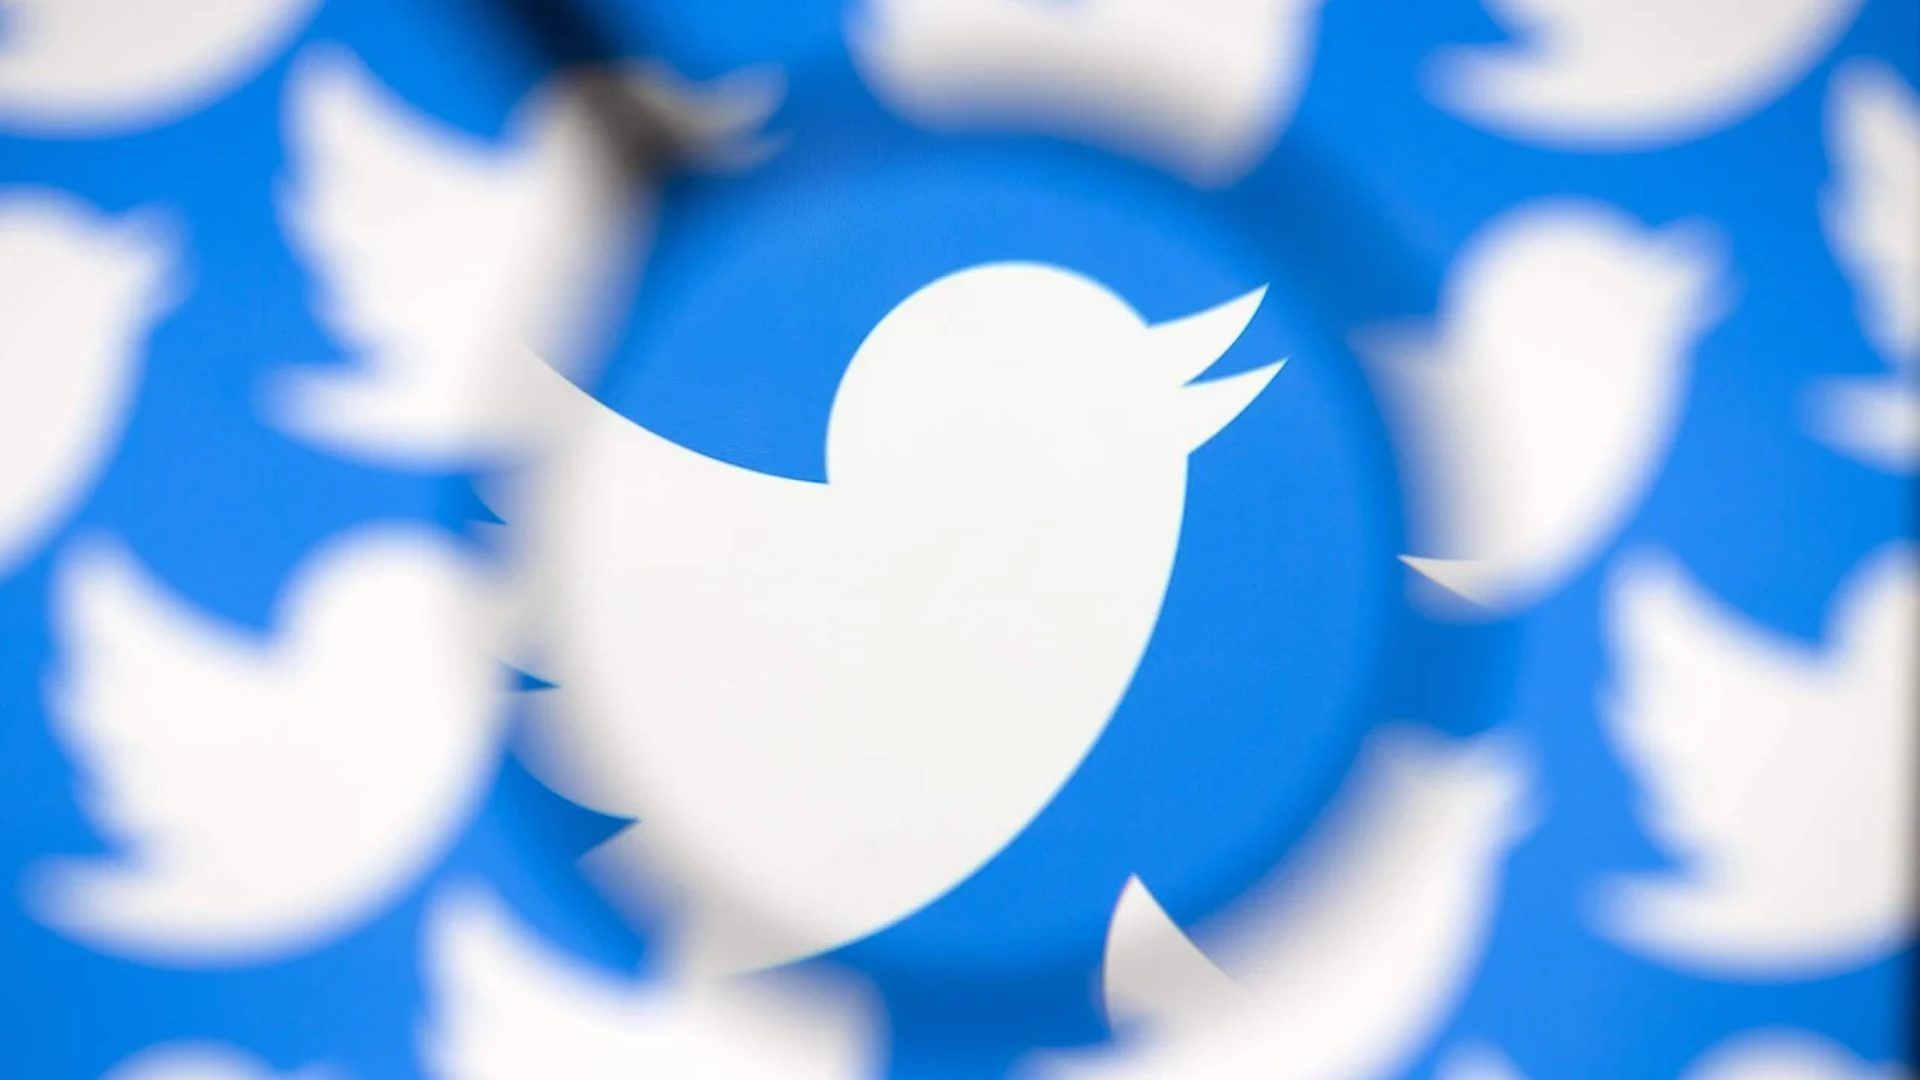 Twitter Circle tweets are not private as you think